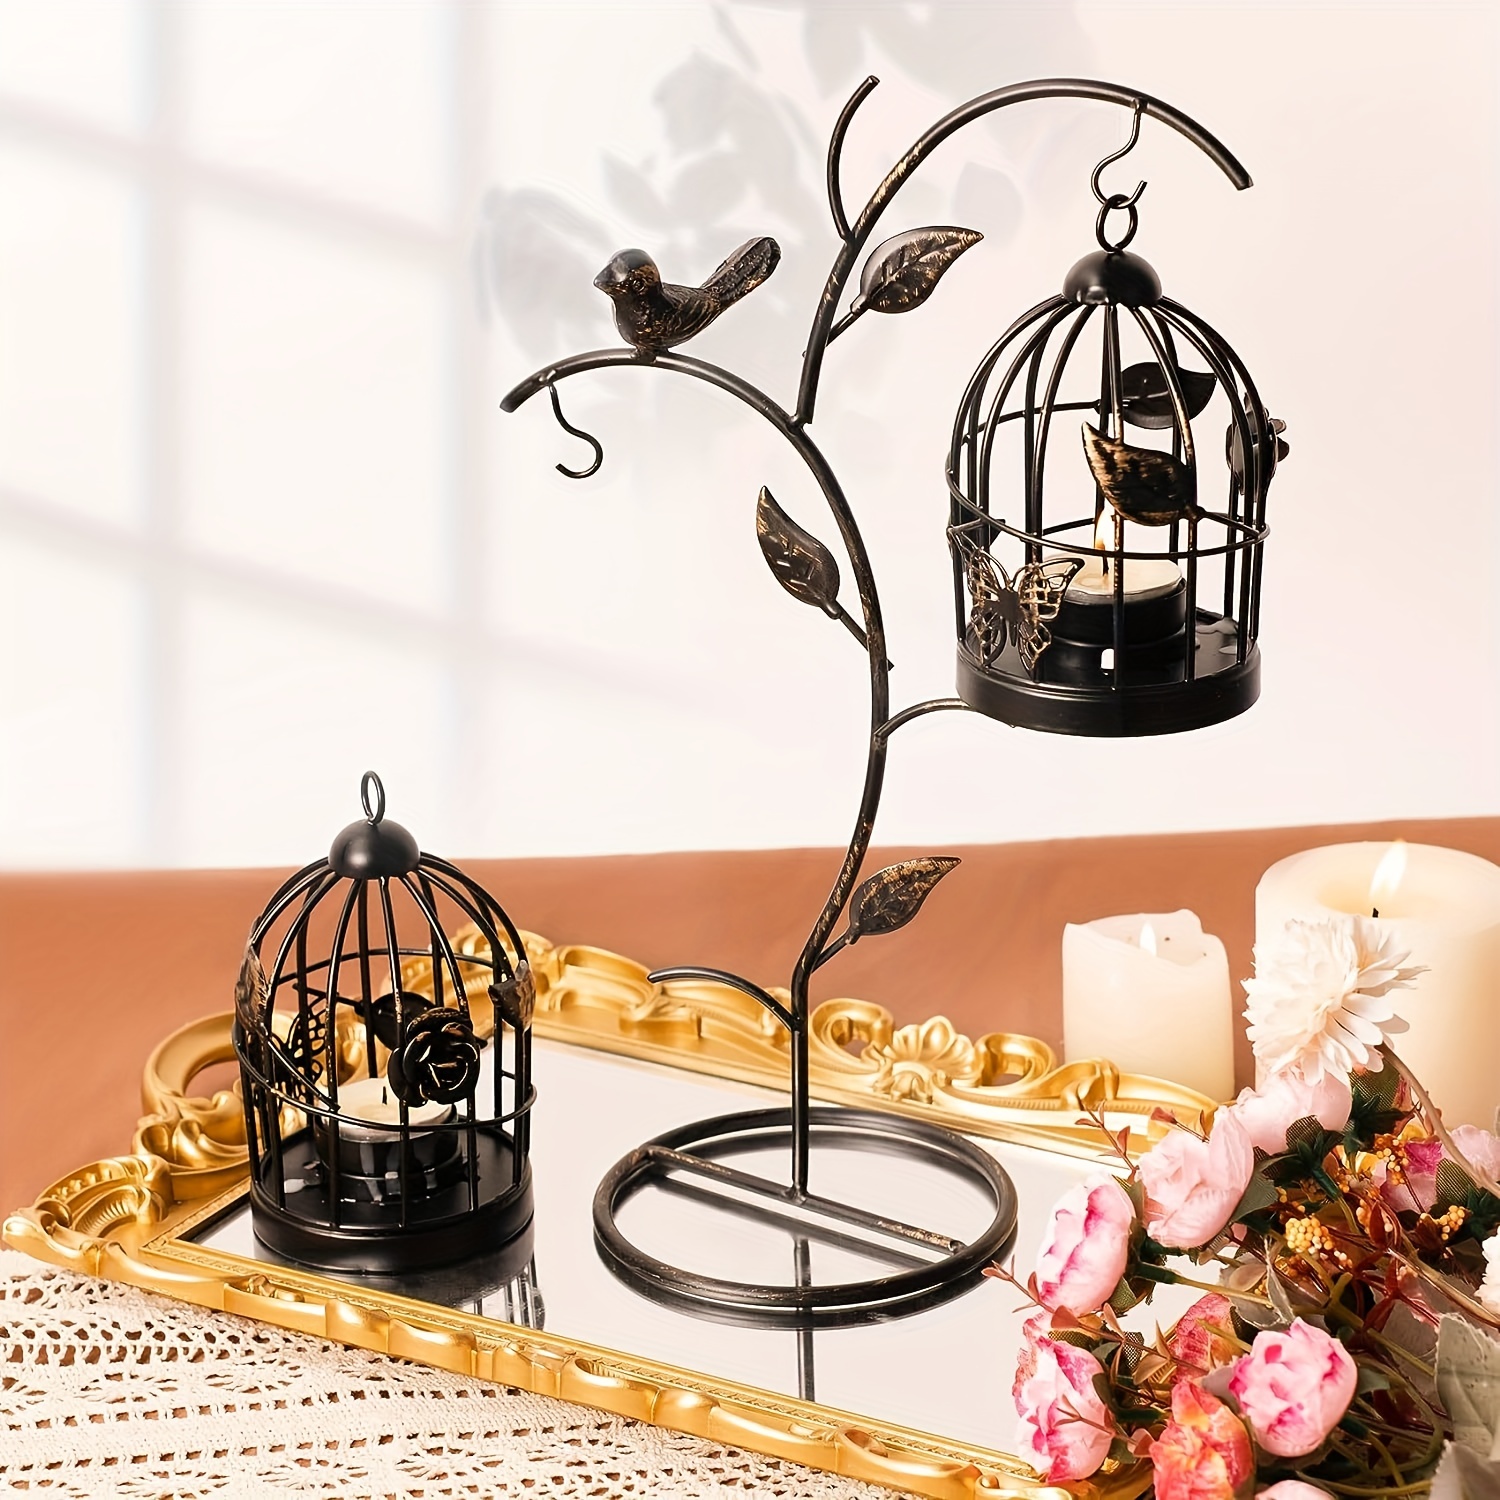 1pc Decorative Birdcage Candle Holders For Tealight Candles 13 8in Tall  Black Vintage Candle Holder Metal Bird Cage Candle Stands For Rustic Home  Decor Table Wedding Christmas Centerpiece Bird Decor